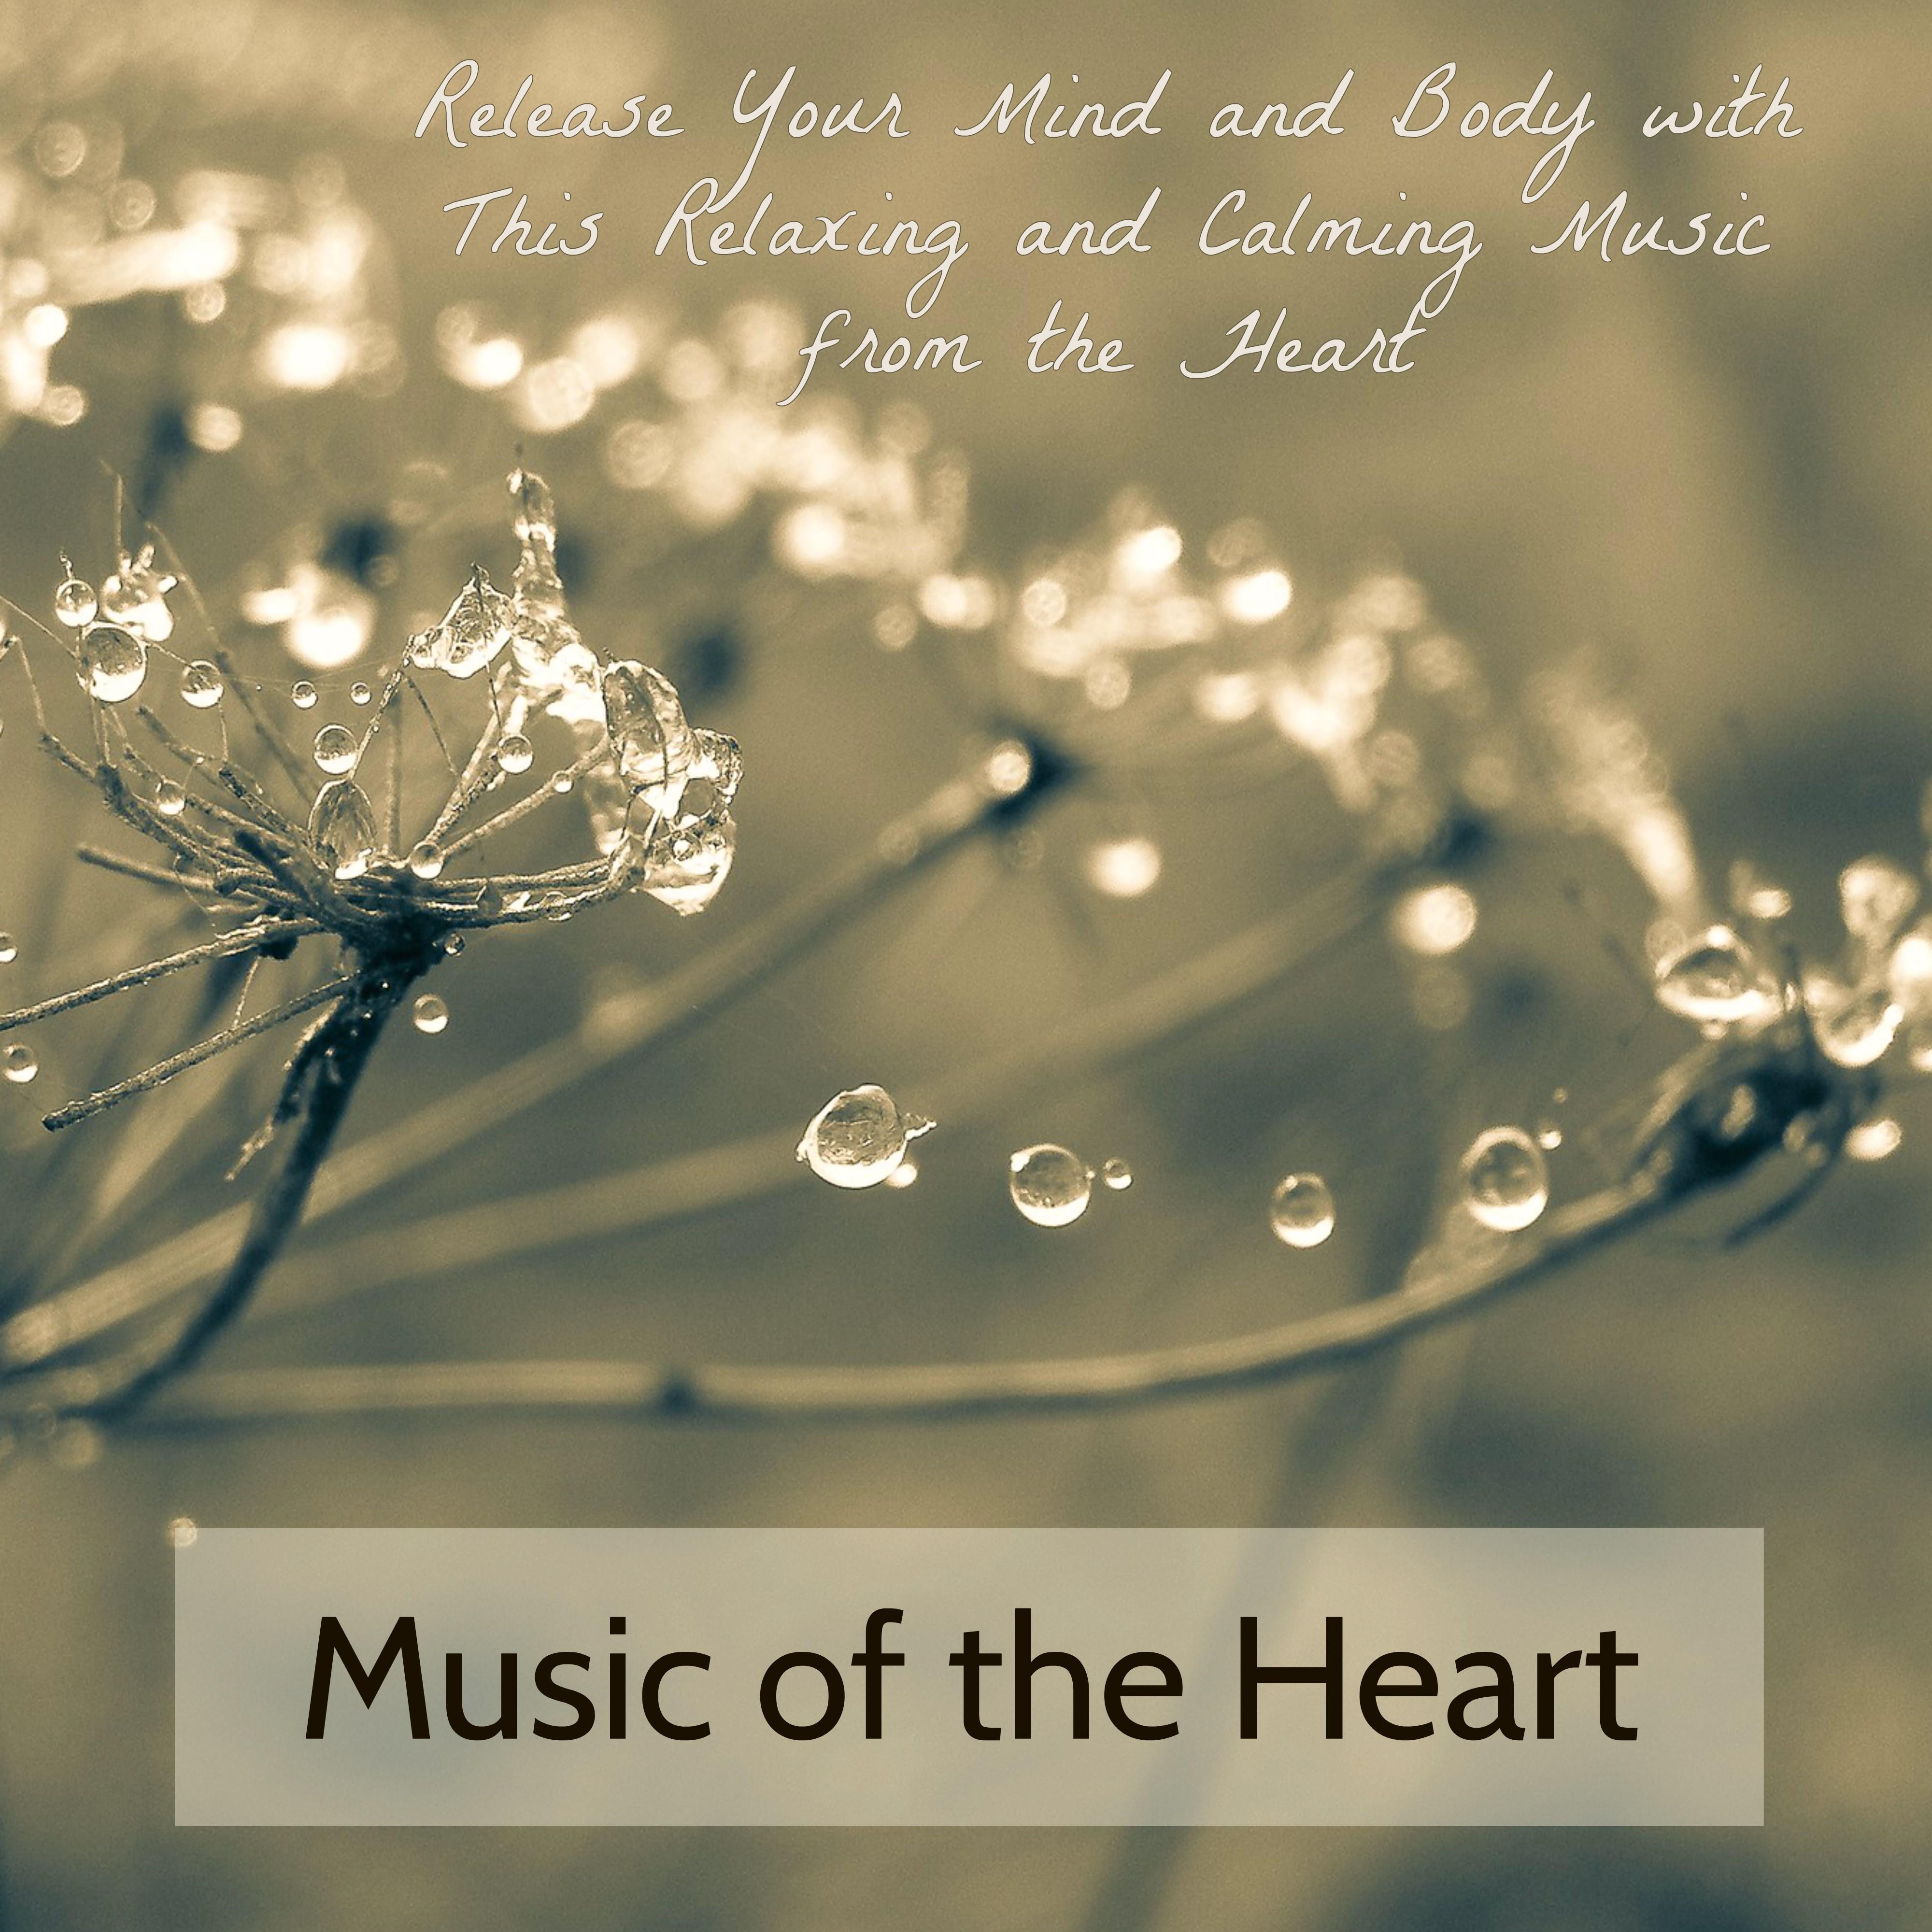 Music of the Heart  Release Your Mind and Body with This Relaxing and Calming Music from the Heart